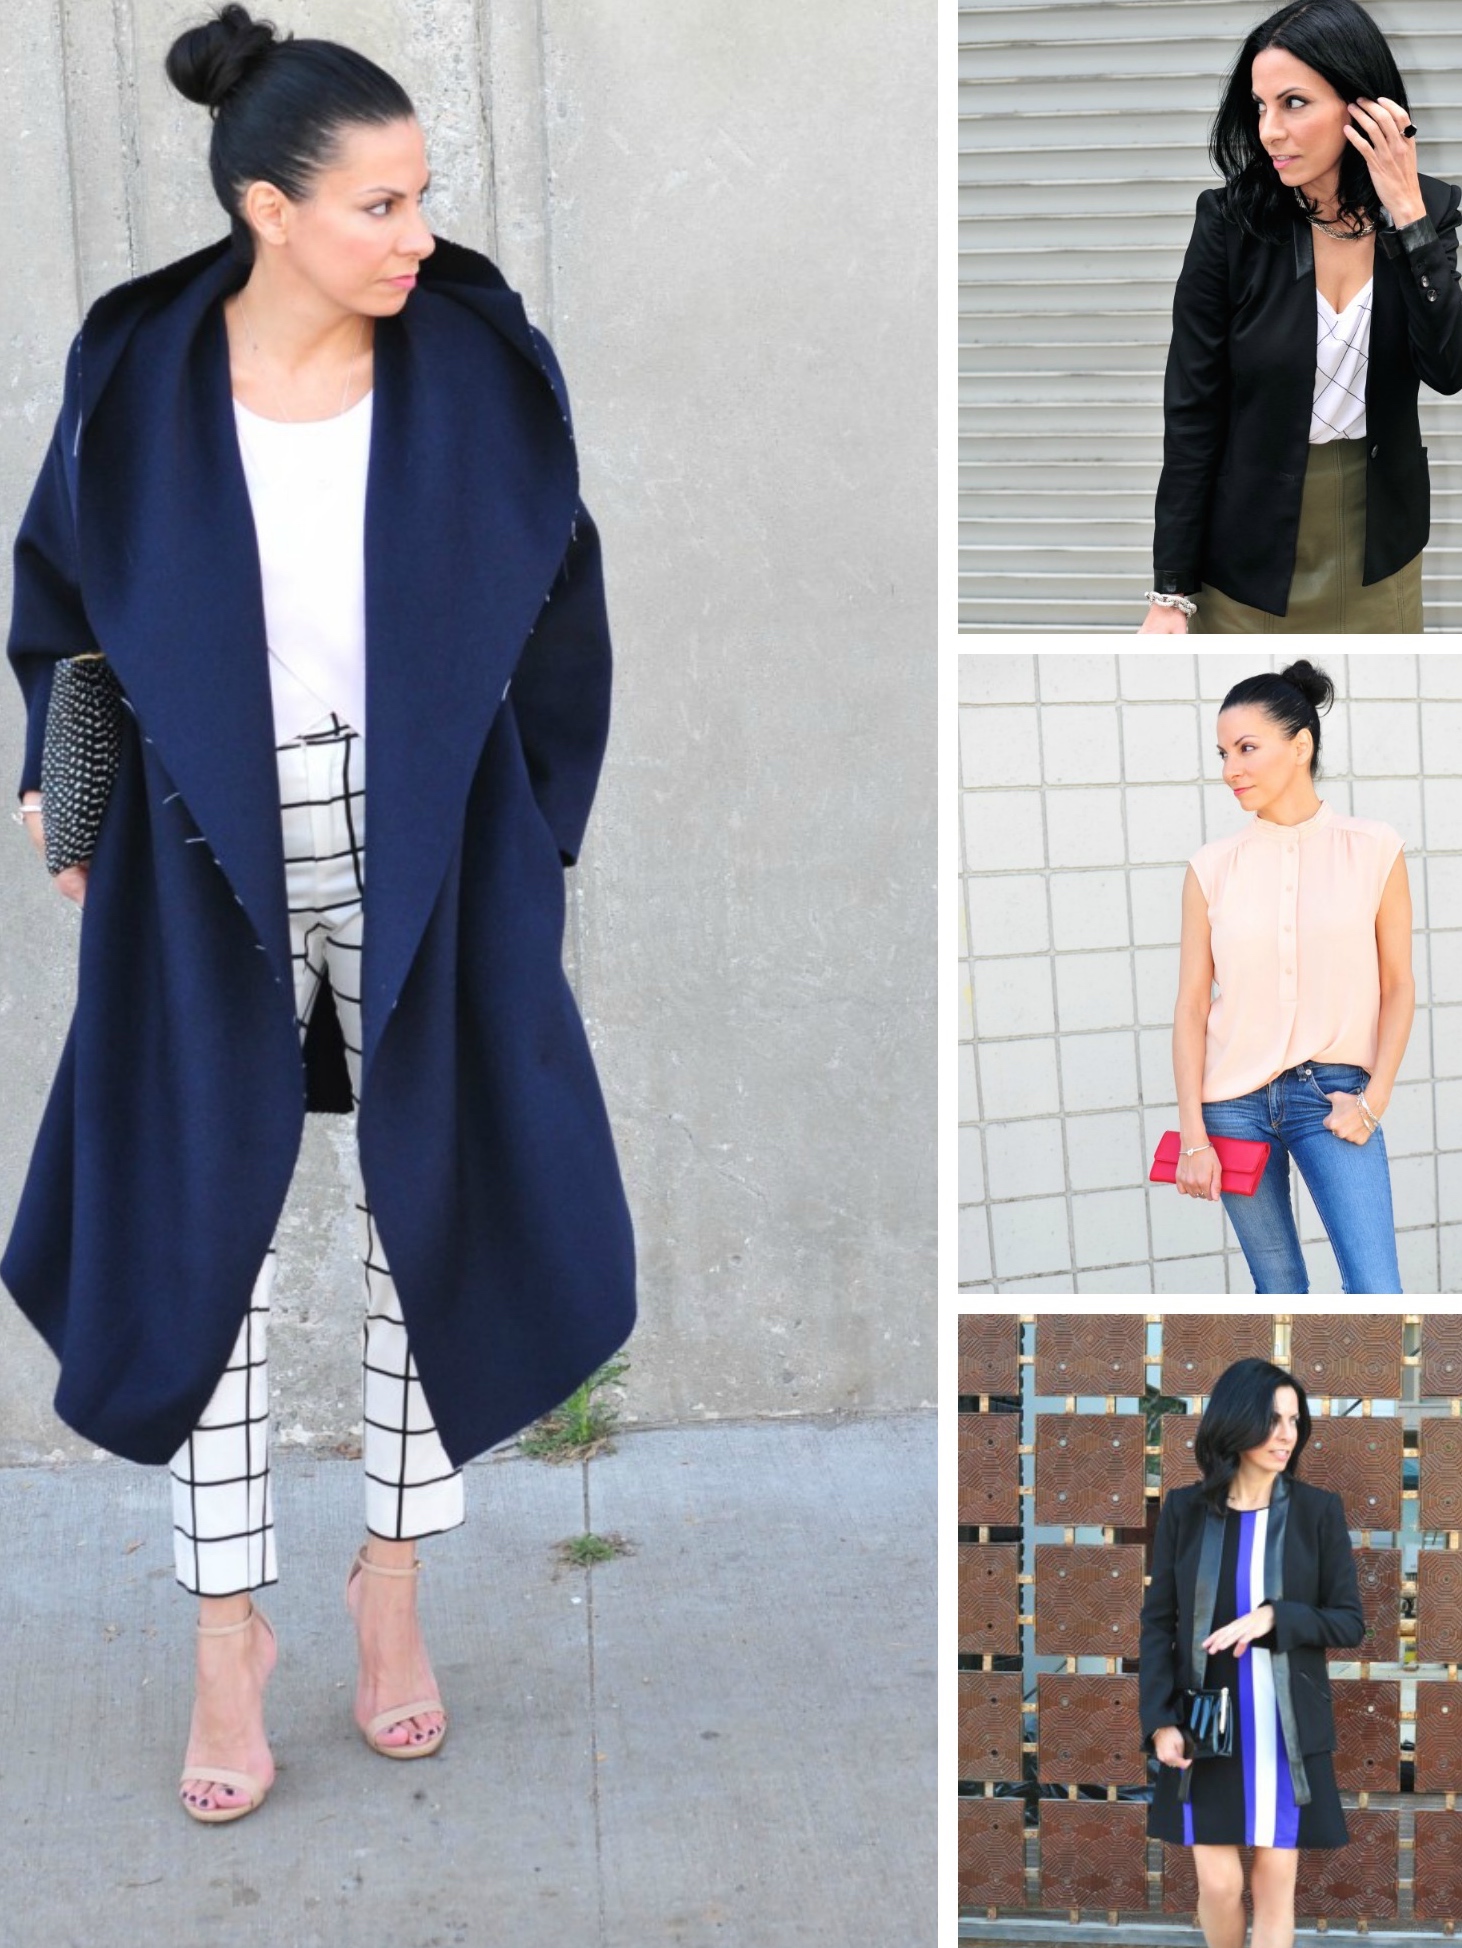 The Week In Review – Weekly Outfit Ideas 04/19/15